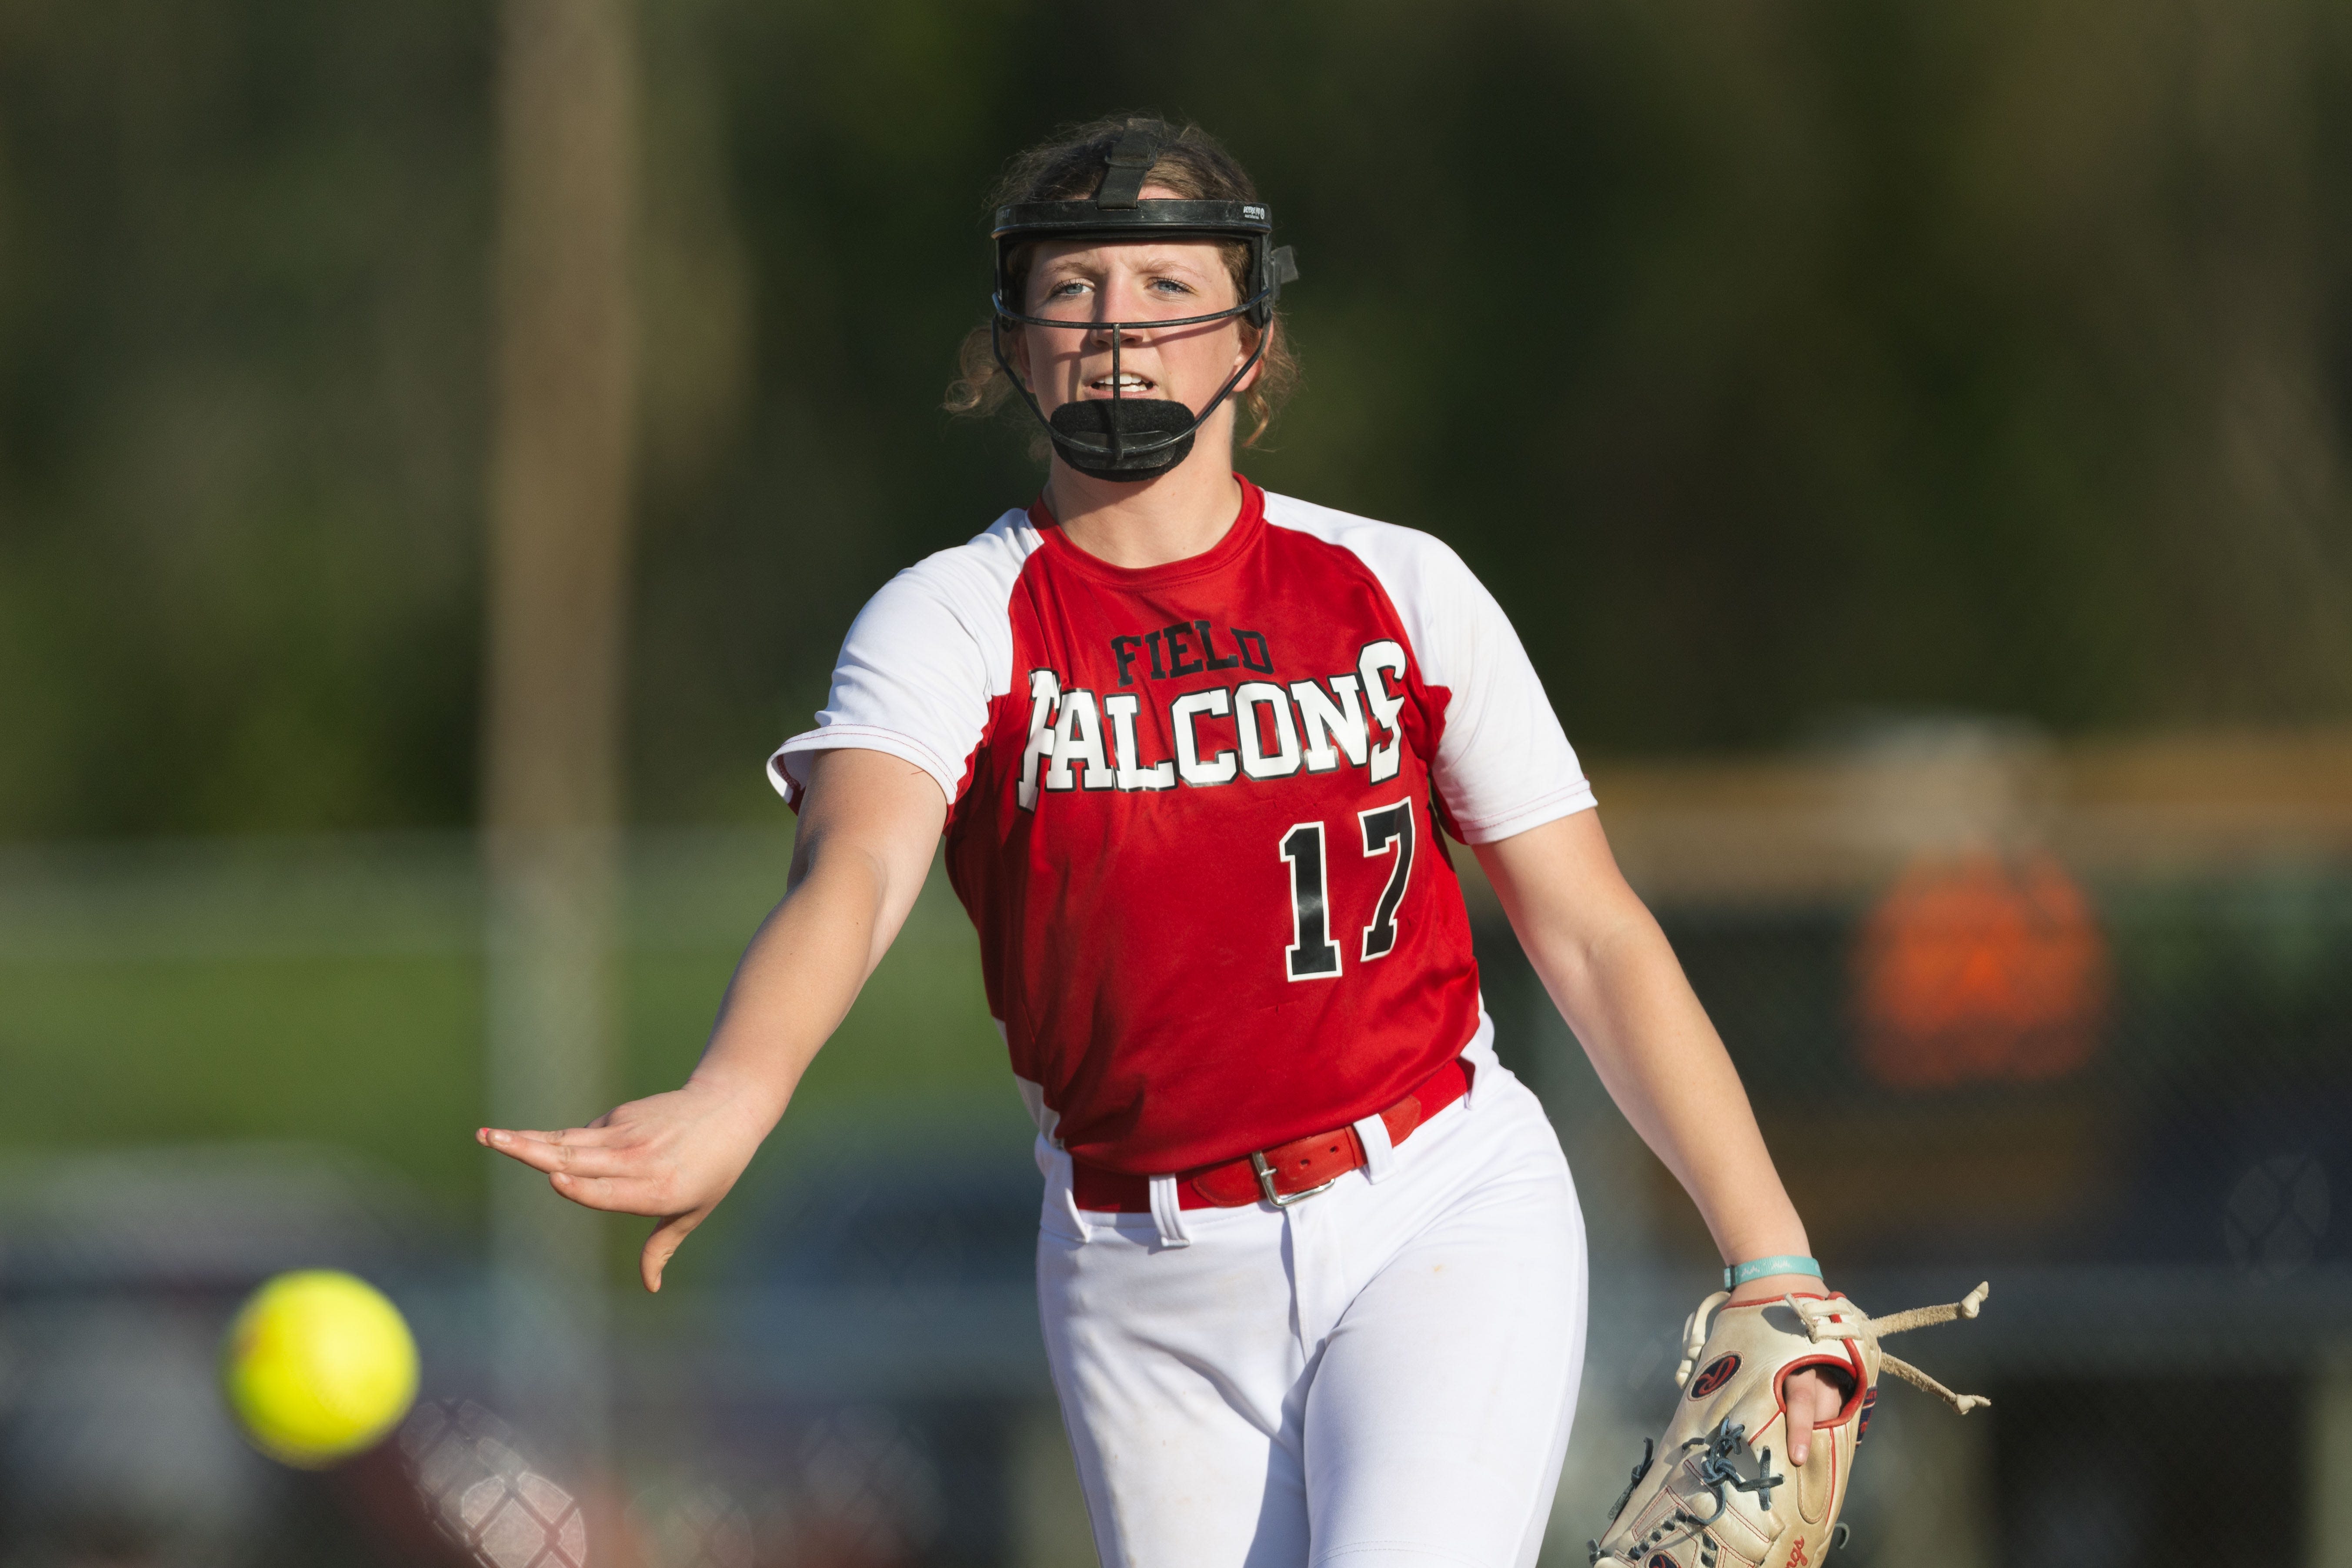 The Week Ahead (May 13): District softball, tennis, track & field highlight busy week